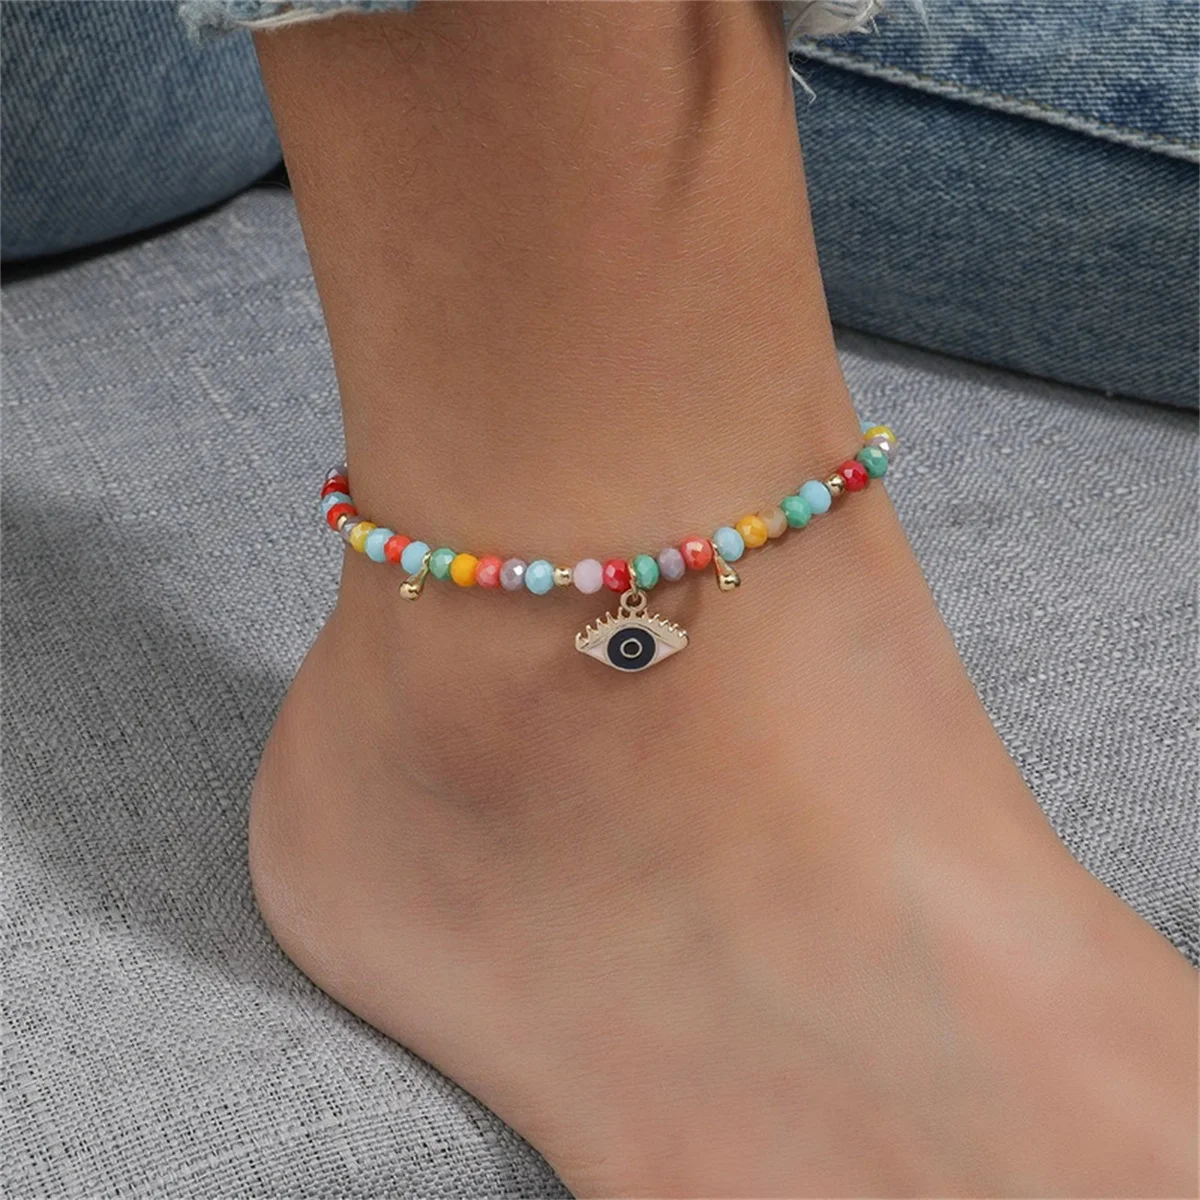 

Boho Colorful Crystal Beads Evil Eye Pendant Anklets For Women Turkish Lucky Demon Eyes Ankle Bracelet Summer Beach Foot Jewelry